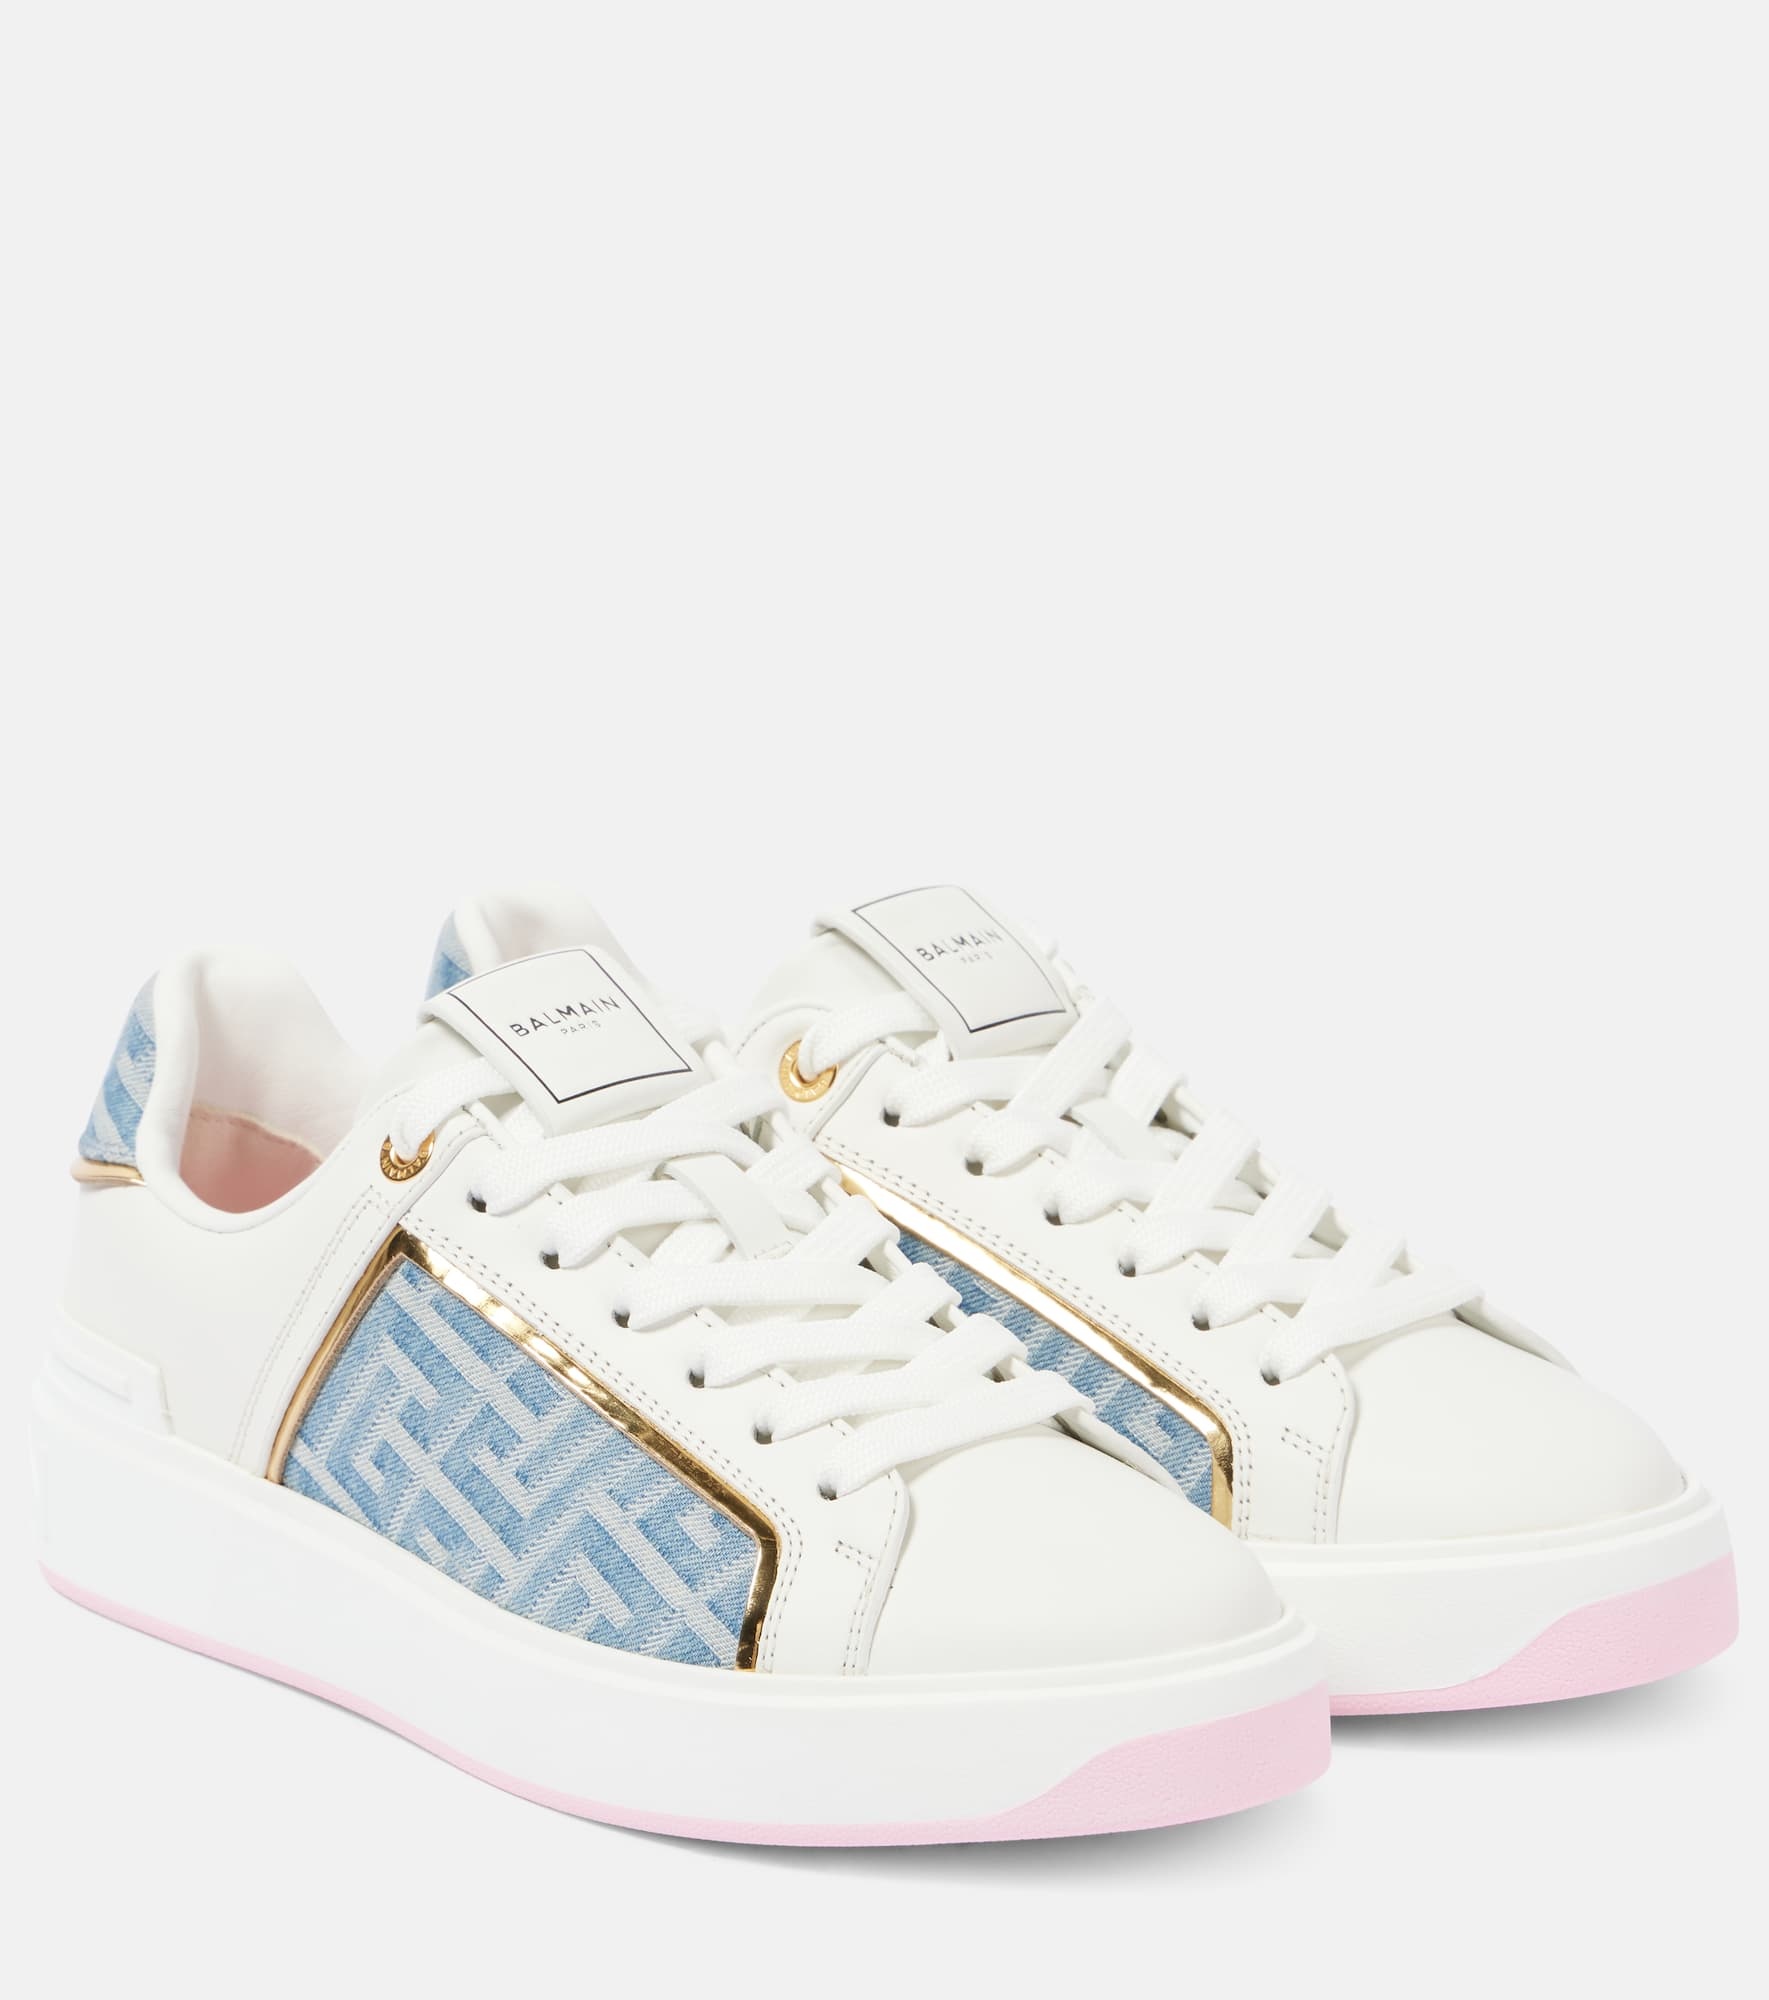 B-Court denim-trimmed leather sneakers - 1